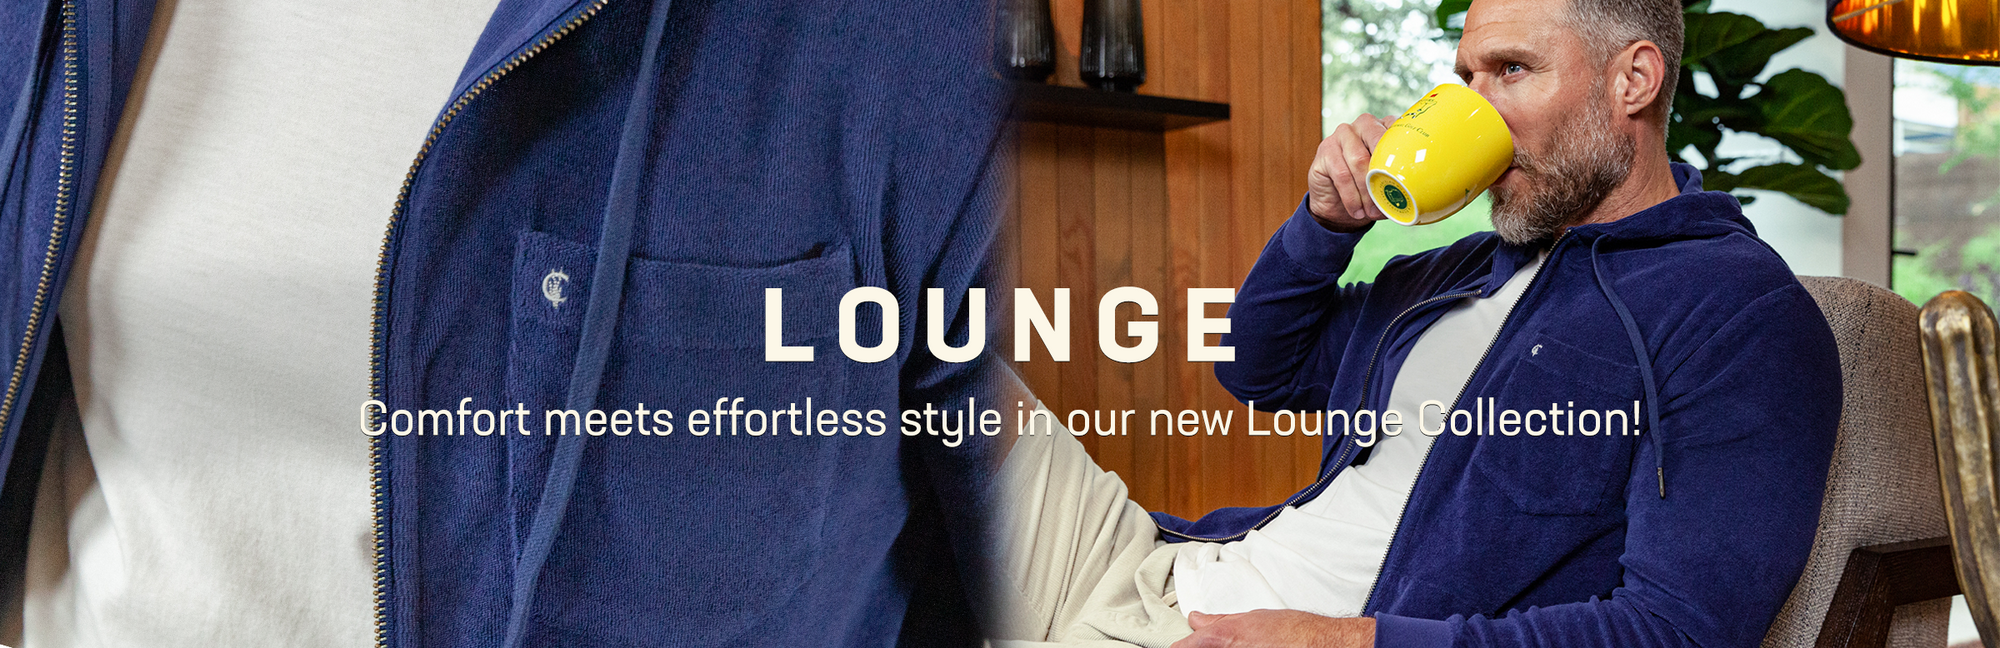 Lounge Collection